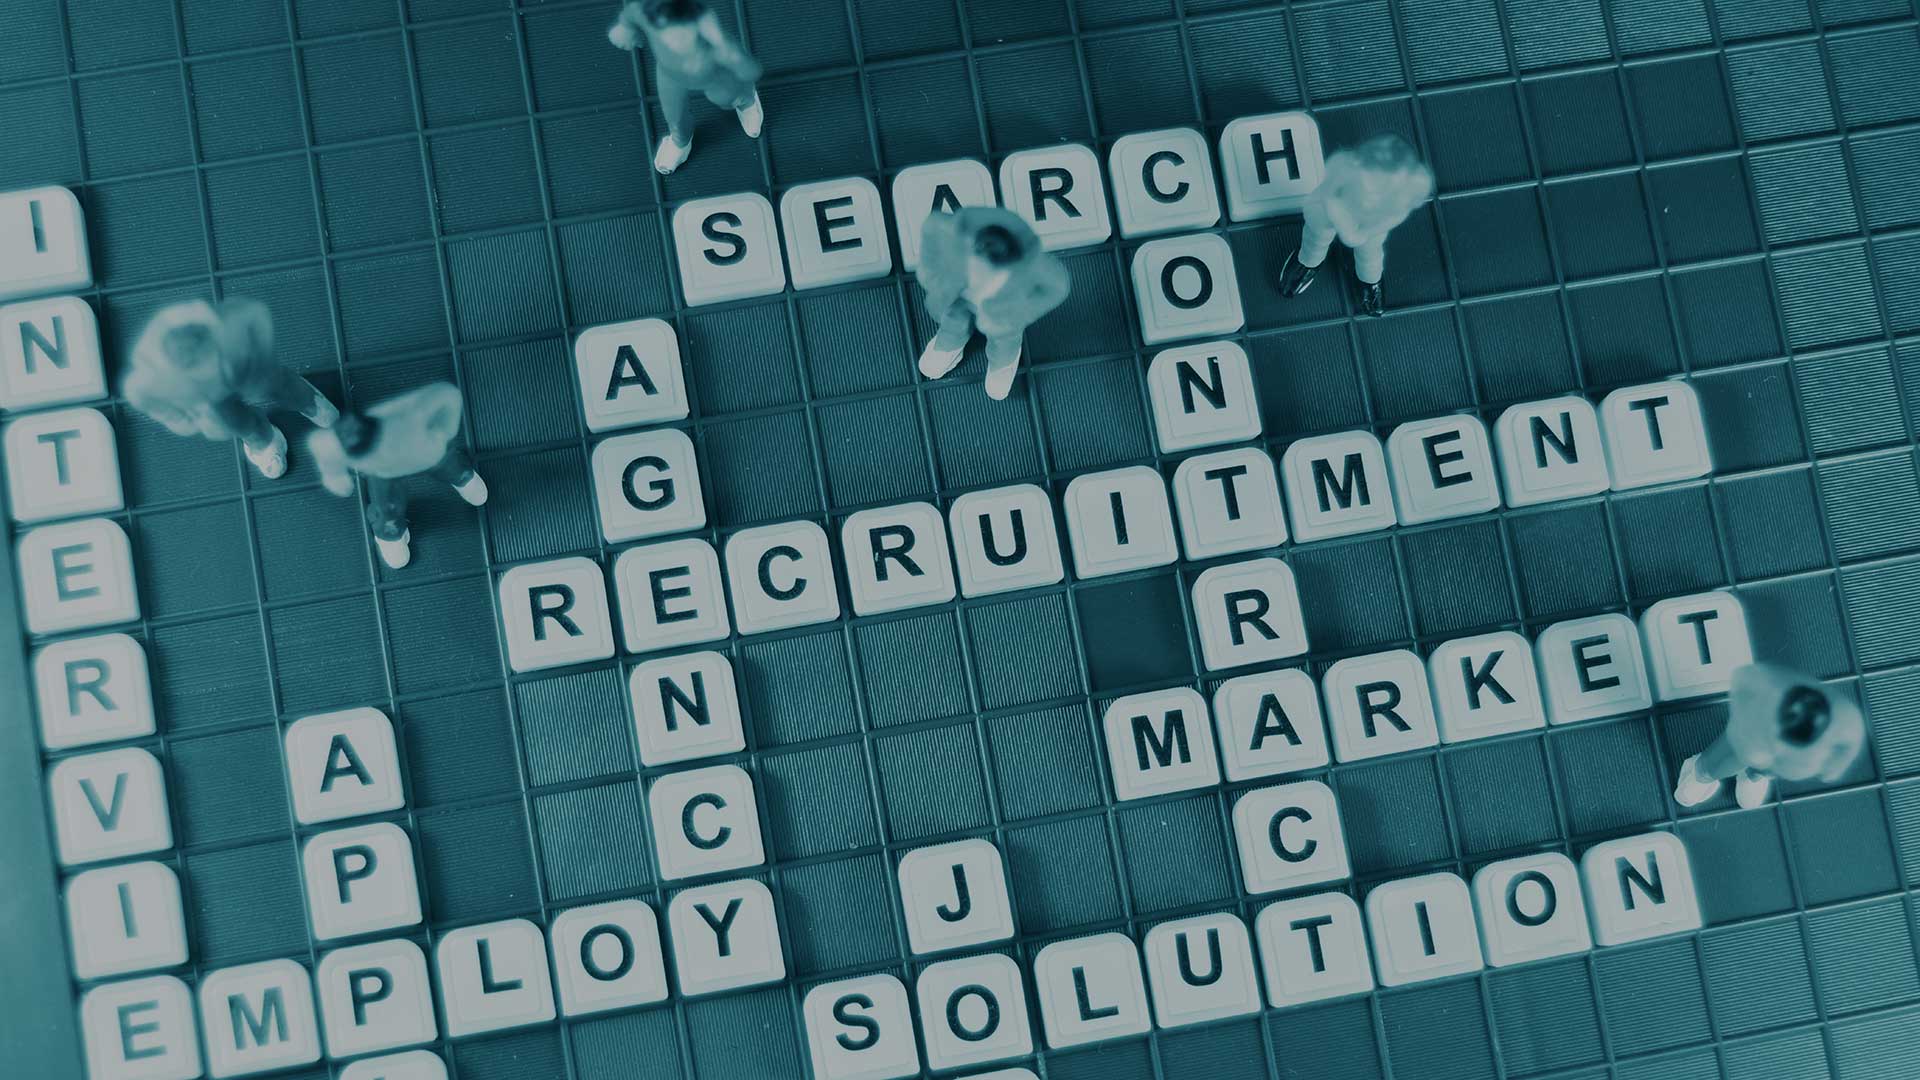 All-in-one Job search